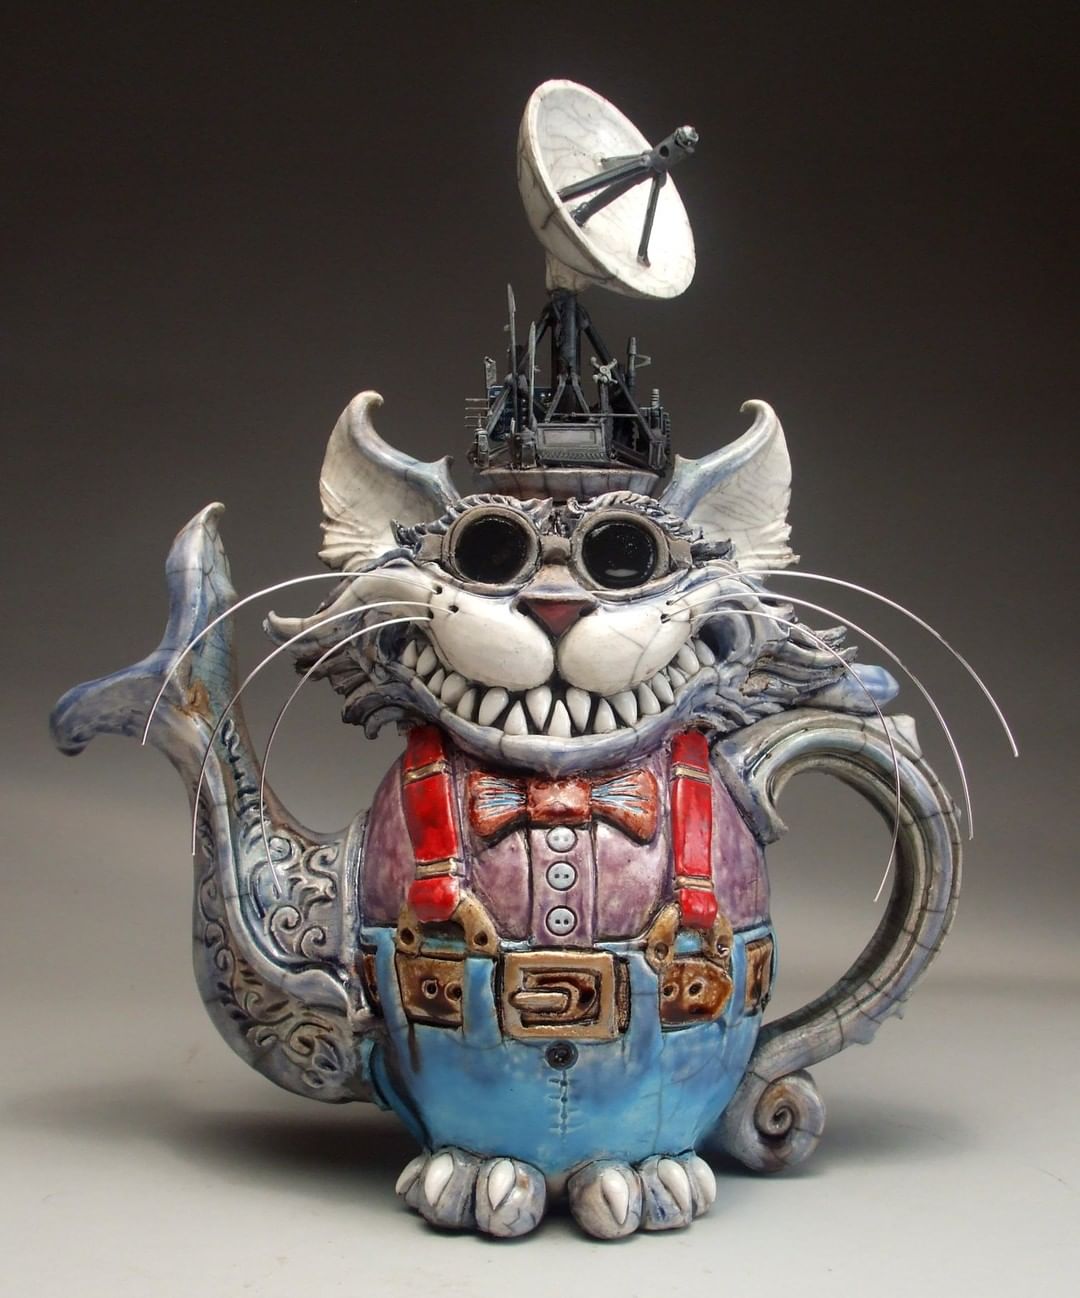 Ceramic Fairytales, Intricate Sculptures, Teapots, And Mugs By Mitchell Grafton (15)